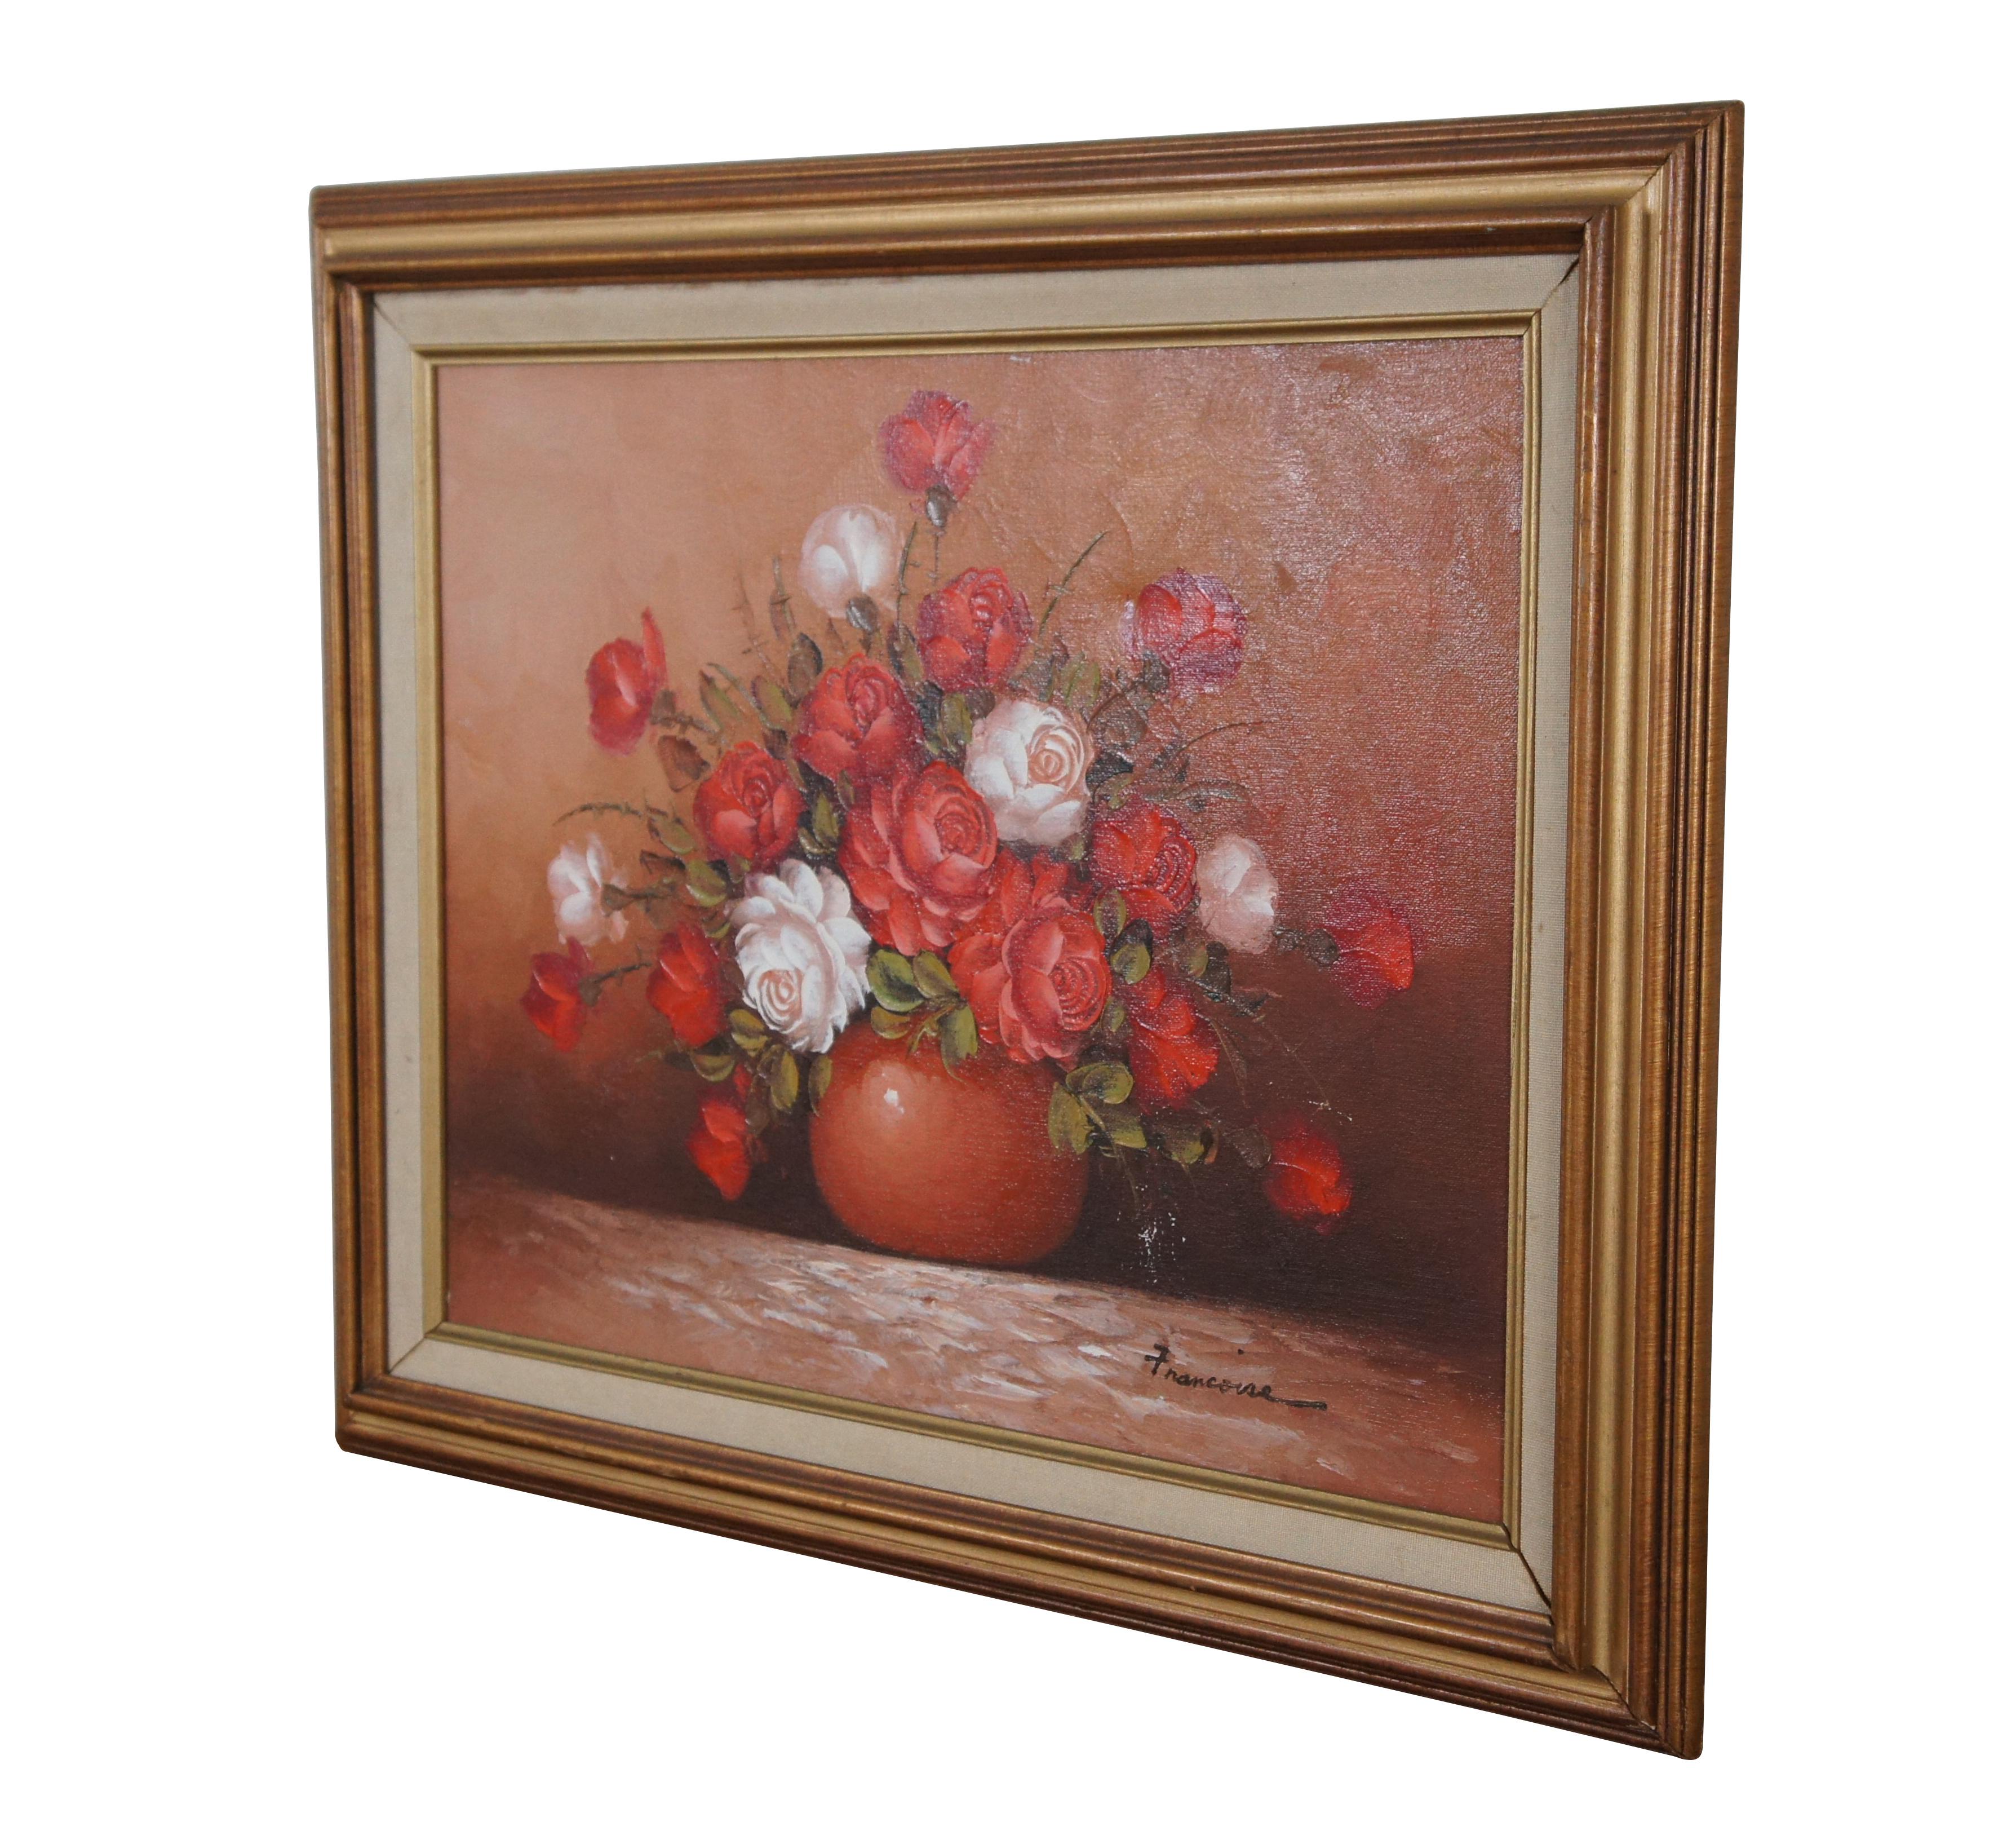 Late 20th century oil on canvas realistic still life painting of a bouquet of red and white roses in a round vase. Signed Francoise in the lower right. Frame made in Mexico.

Dimensions:
25” x 1.25” x 21” / Sans Frame - 19.5” x 15.75” (Width x Depth